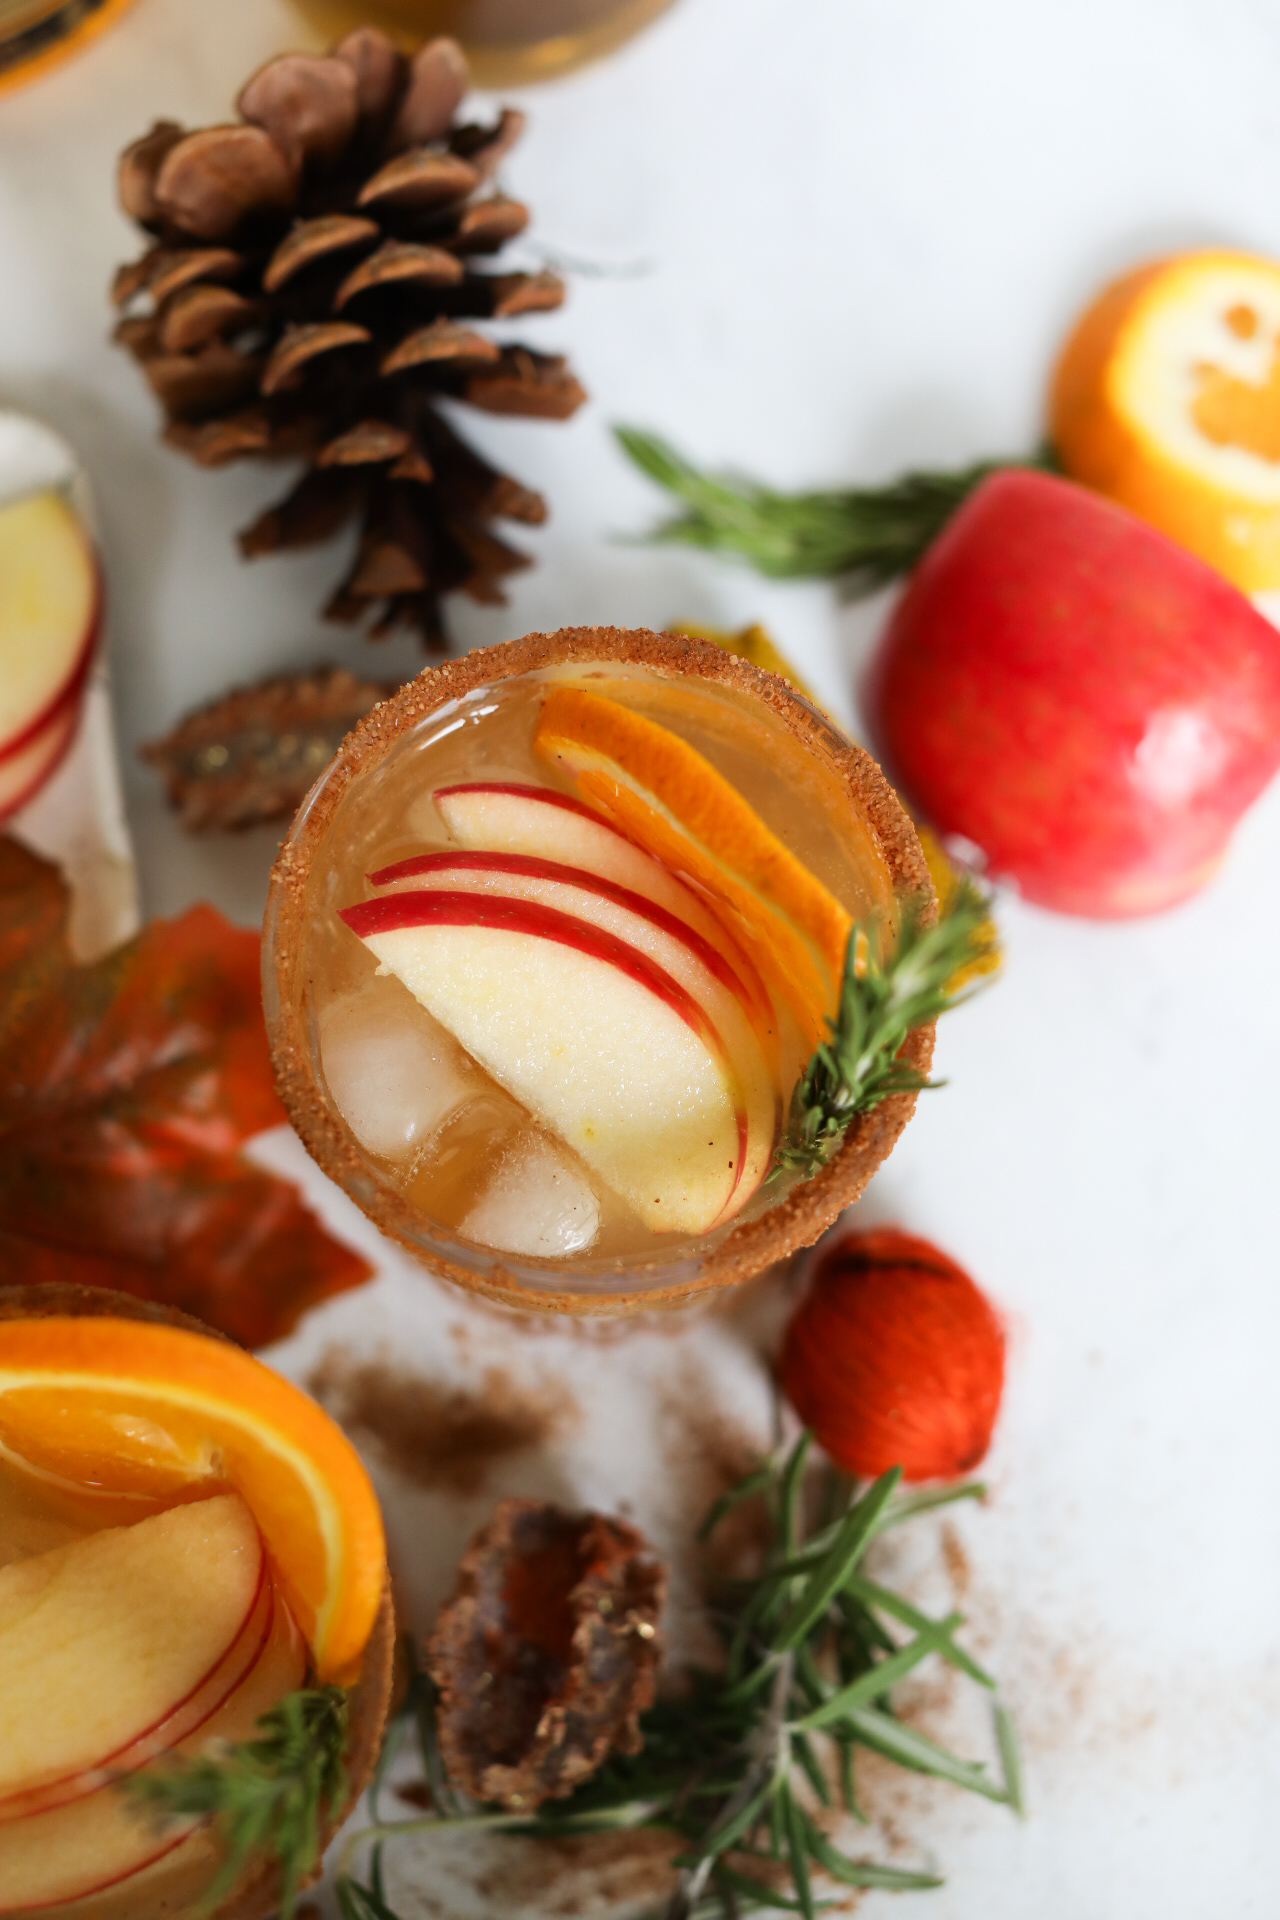 Top down view of Thanksgiving Margarita topped with sliced apple, orange and rosemary sprig.